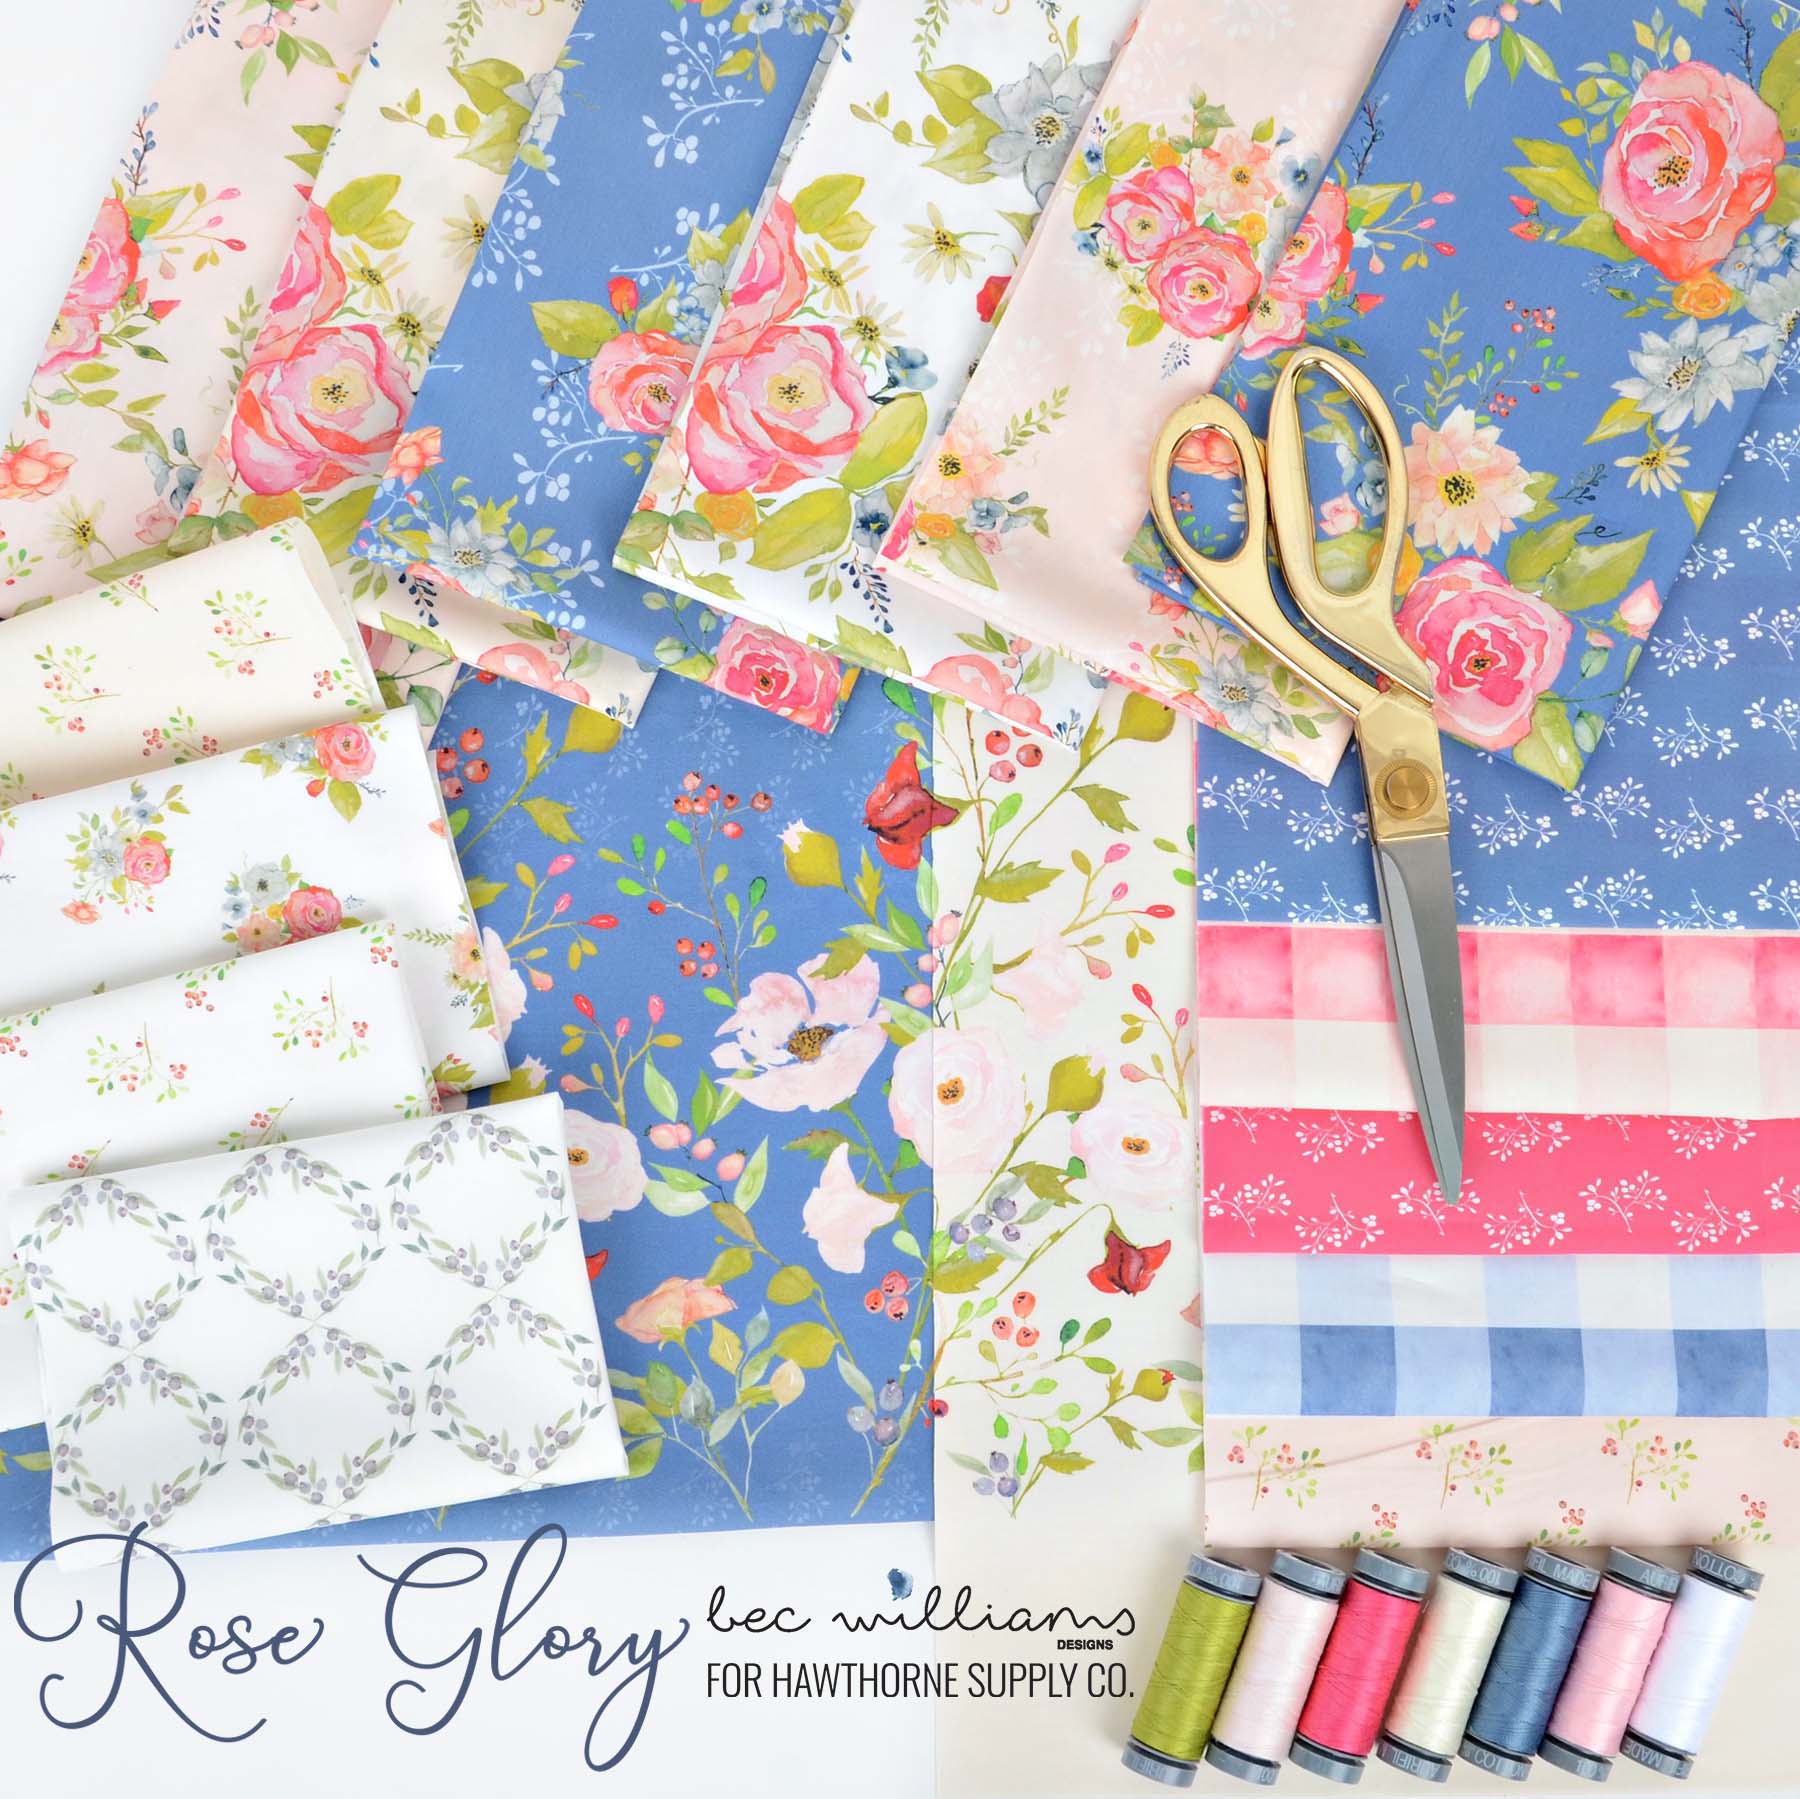 Rose Glory Fabric Poster Bec Williams for Hawthorne Supply Co